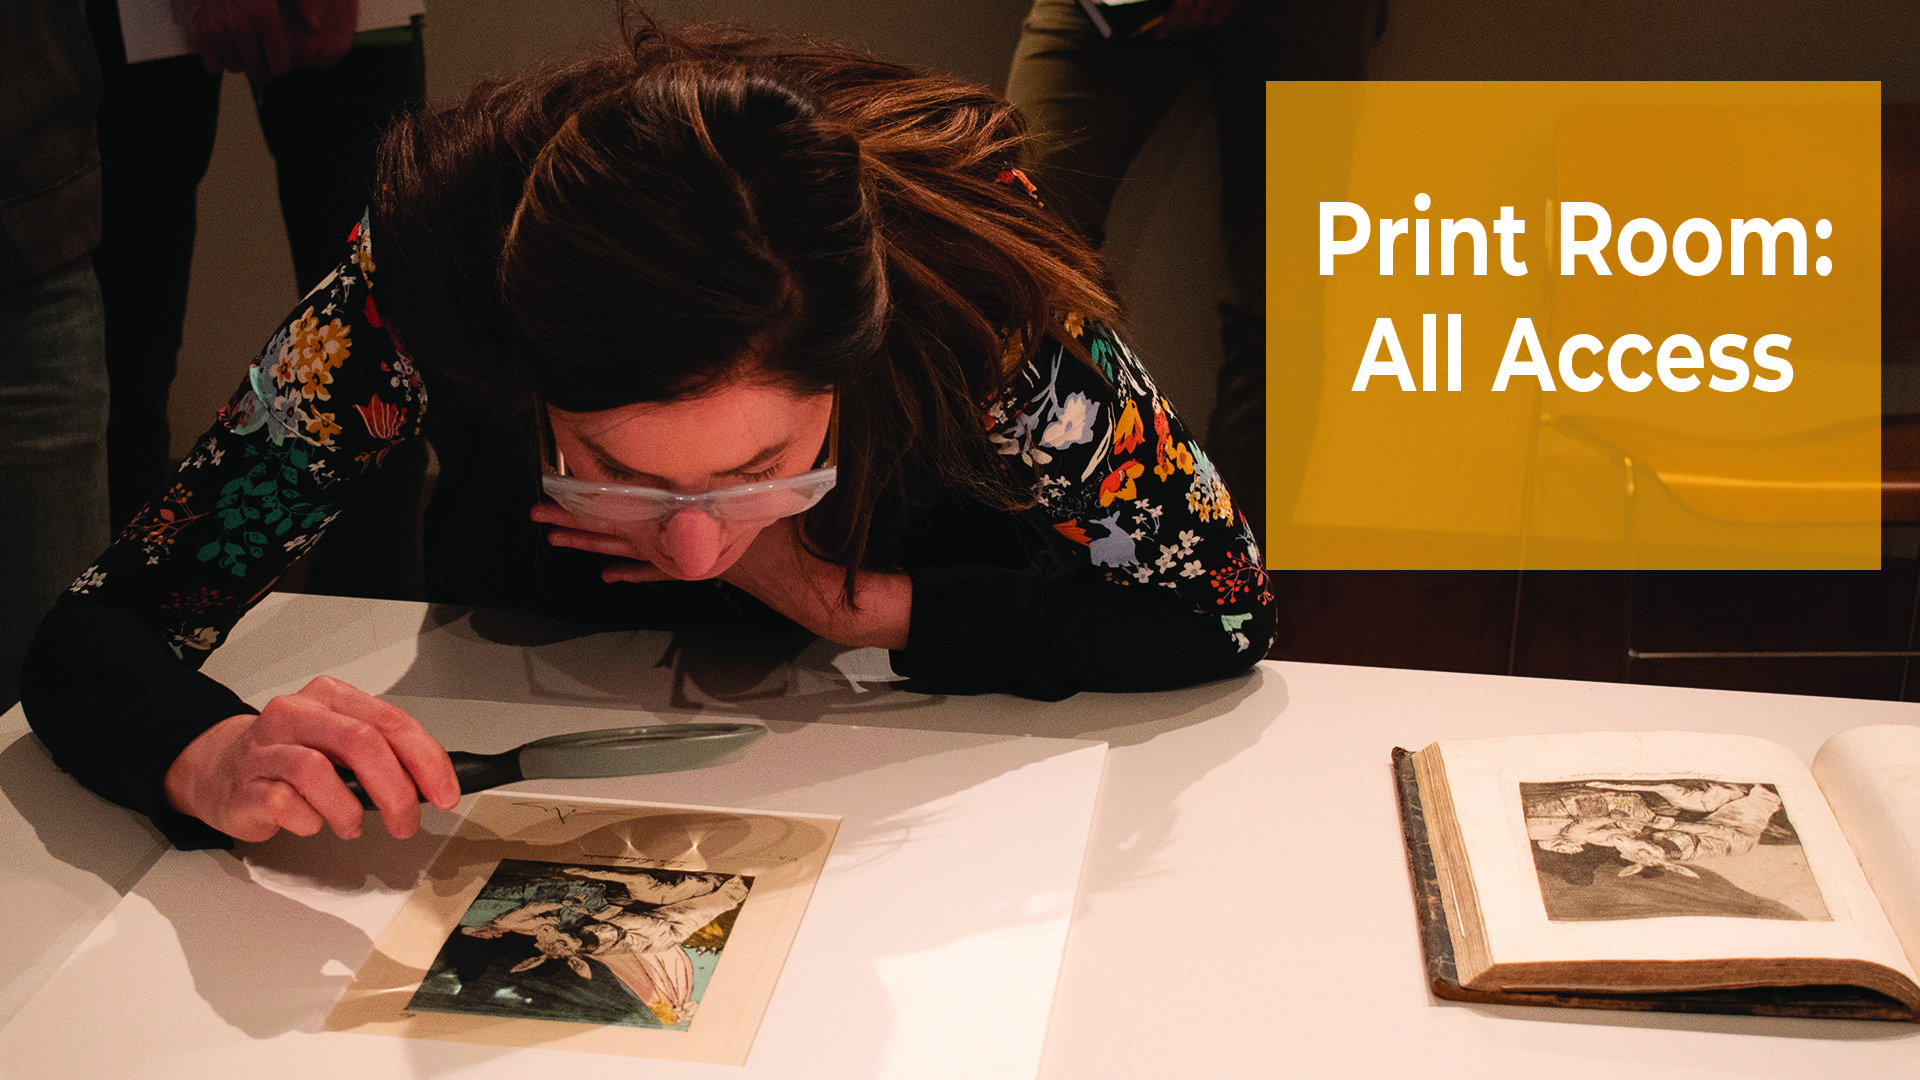 Print Room: All Access at the Chazen Museum of Art